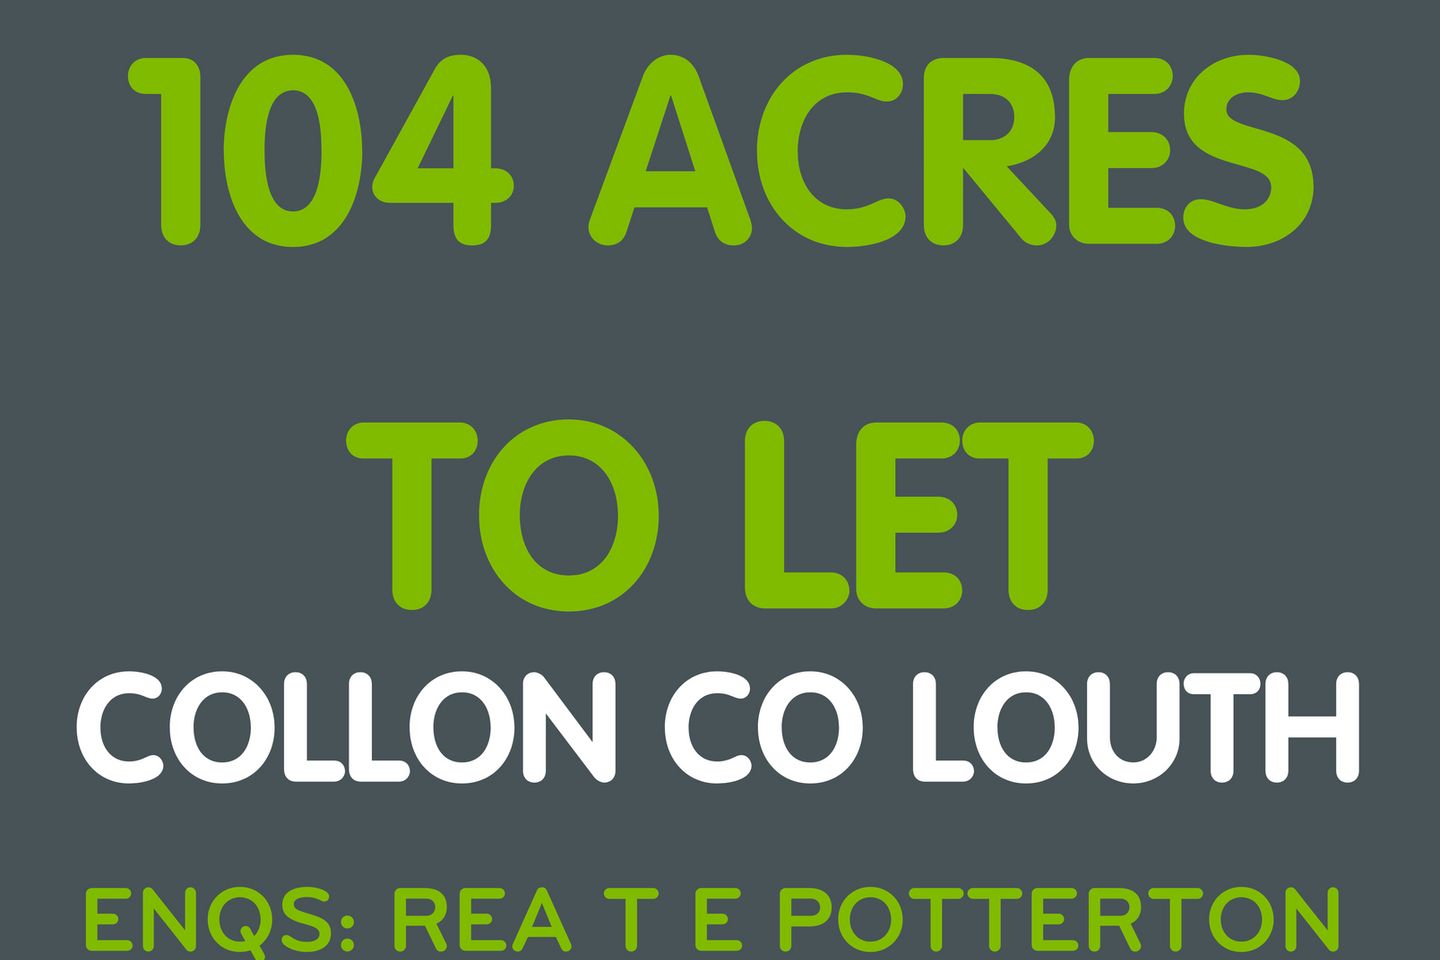 104 ACRES TO LET / SILAGE LAND, Collon, Co. Louth